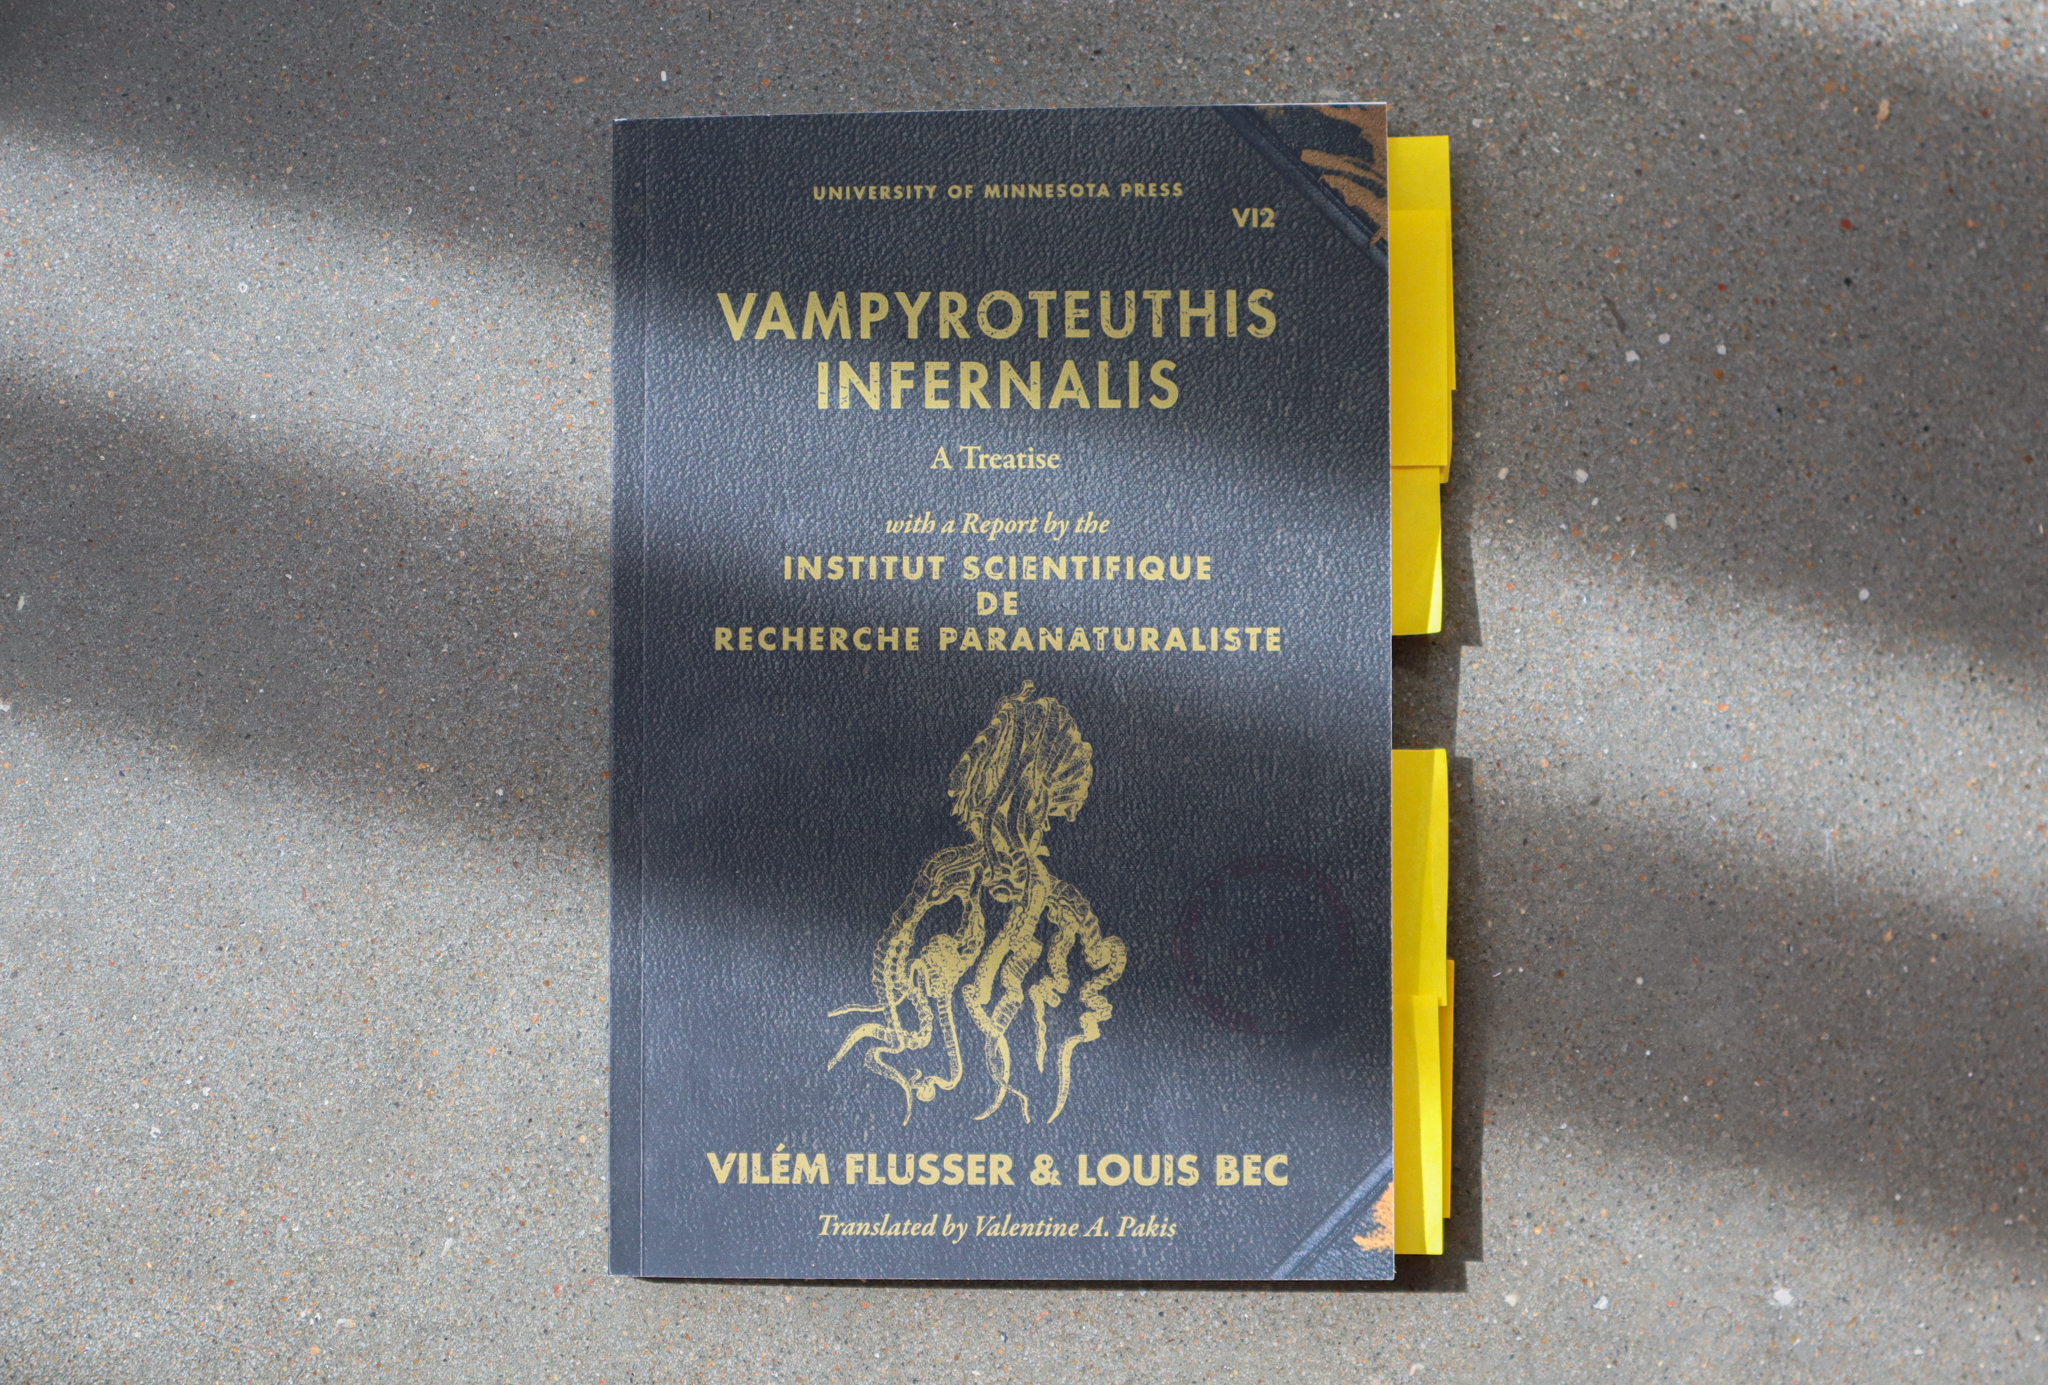 A book lies on cement. There are yellow post-it tabs. The book is dark gray cover with gold writing. A large illustration of a squid is on the bottom half of the cover.